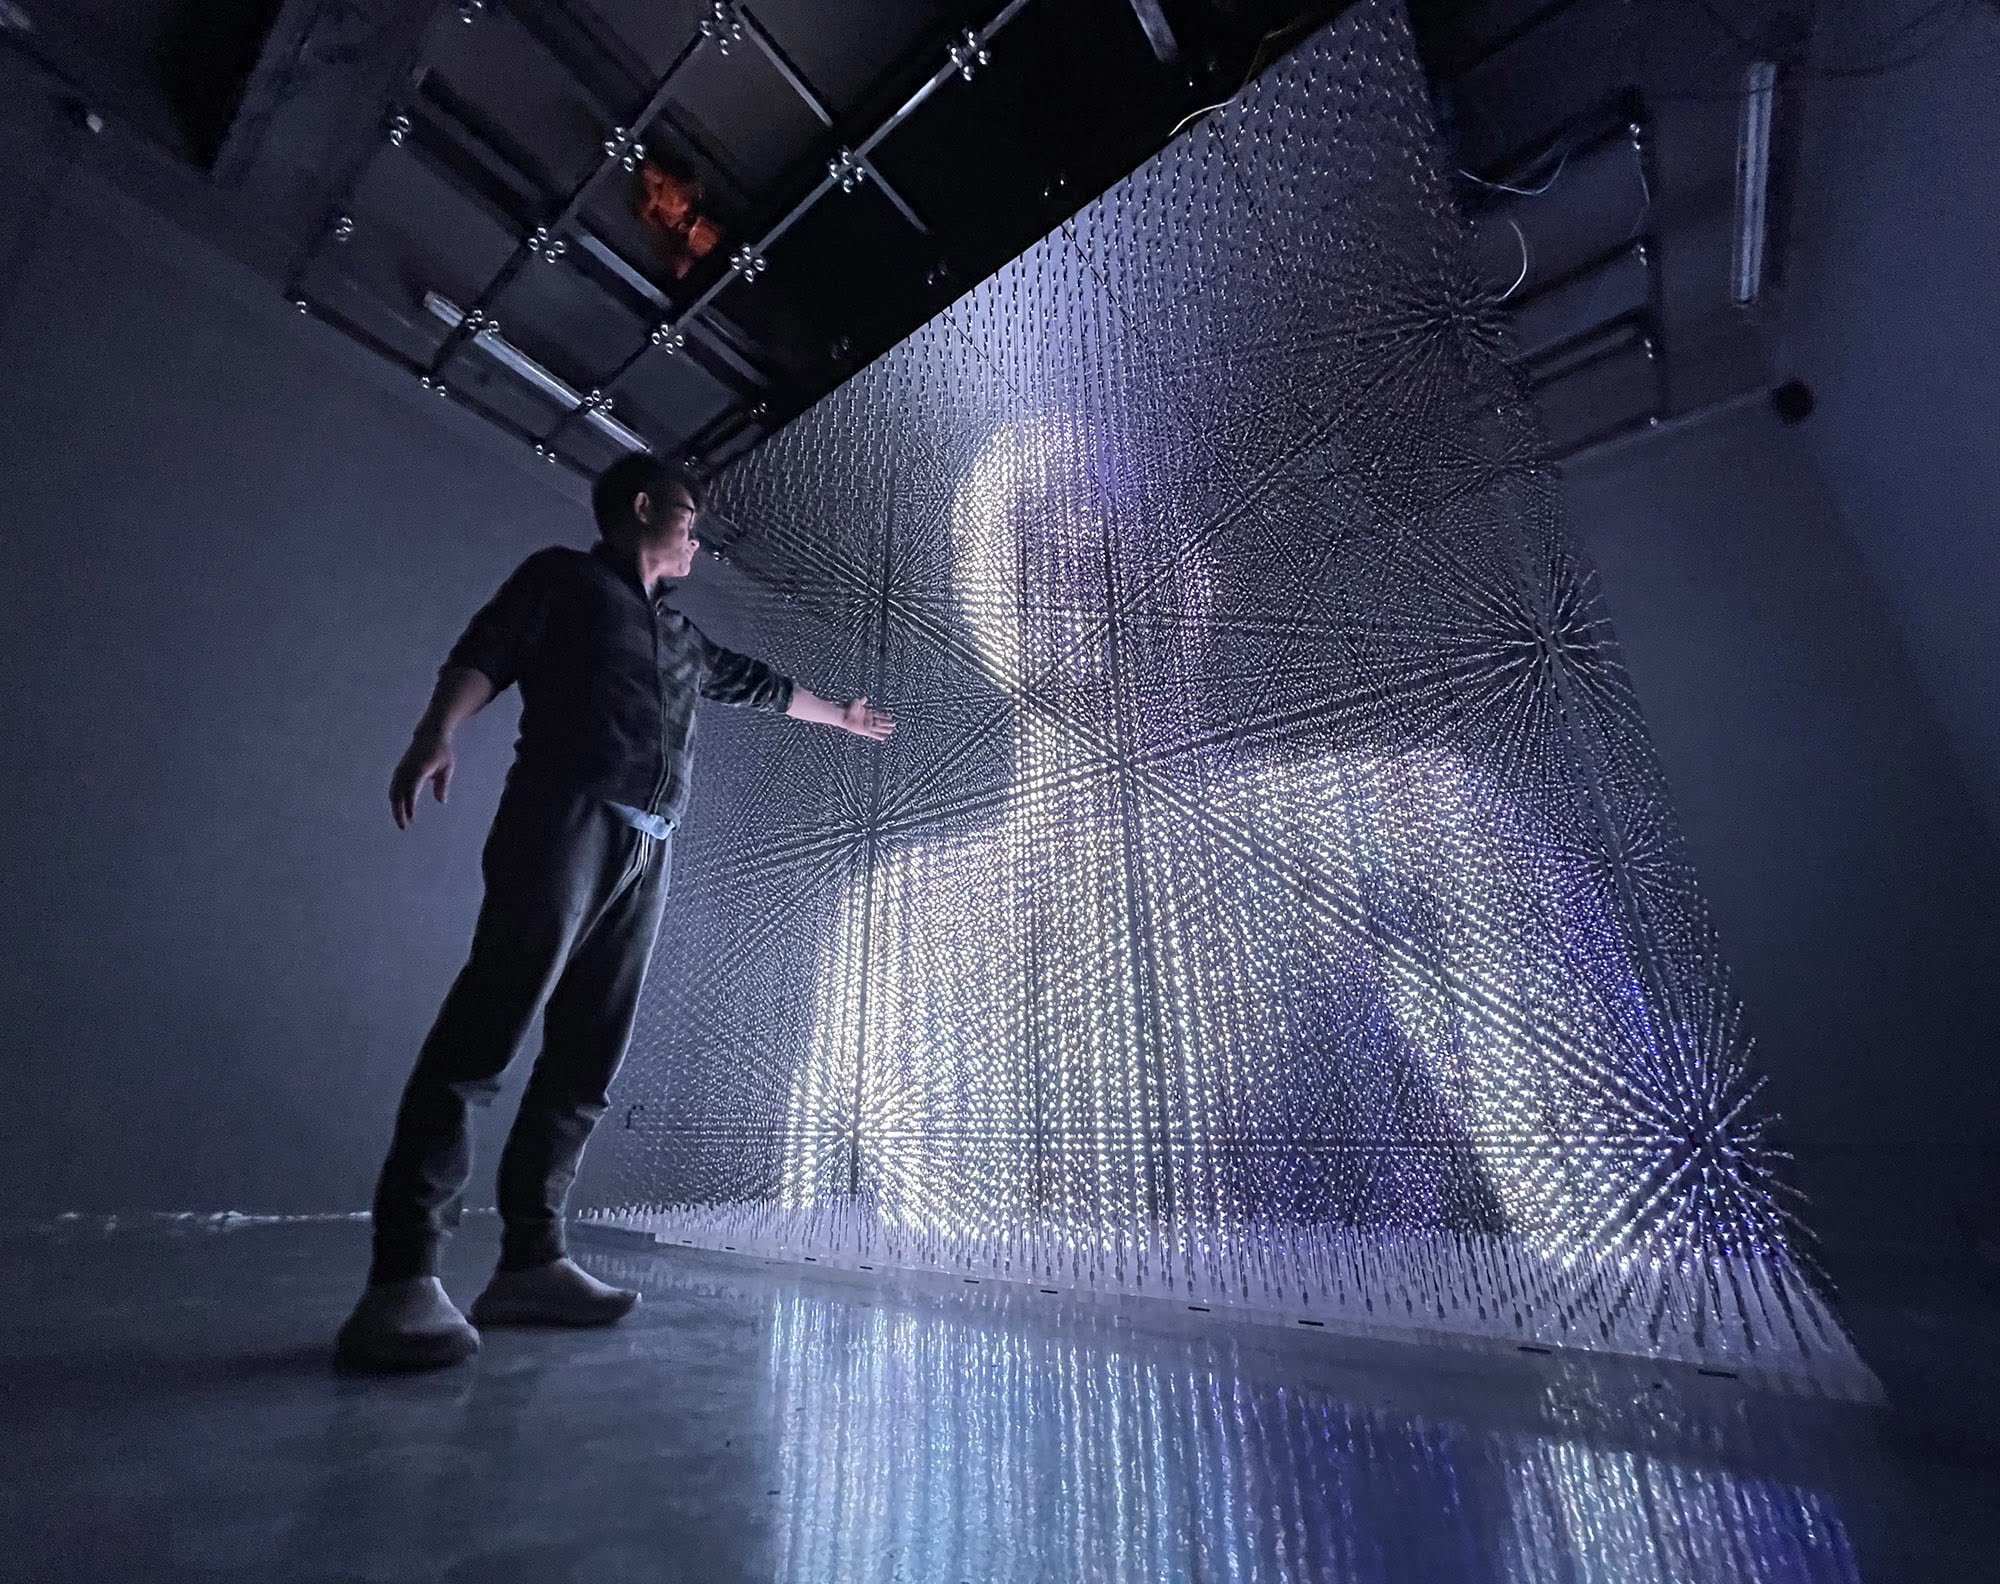 This Huge Hologram-Like 3D Display Is Made of Thousands of Tiny LED Lights